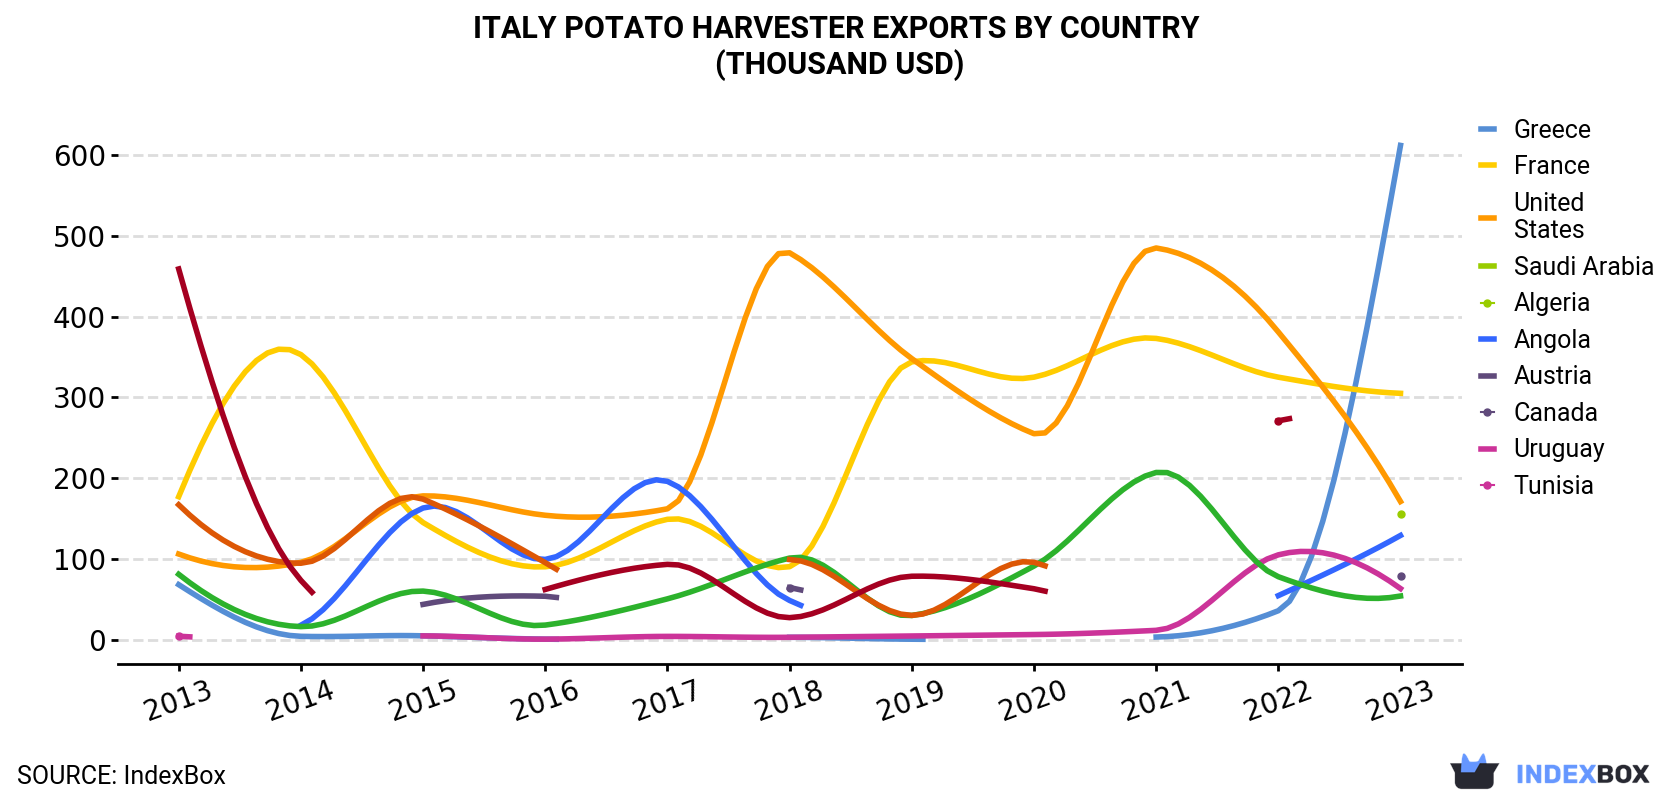 Italy Potato Harvester Exports By Country (Thousand USD)